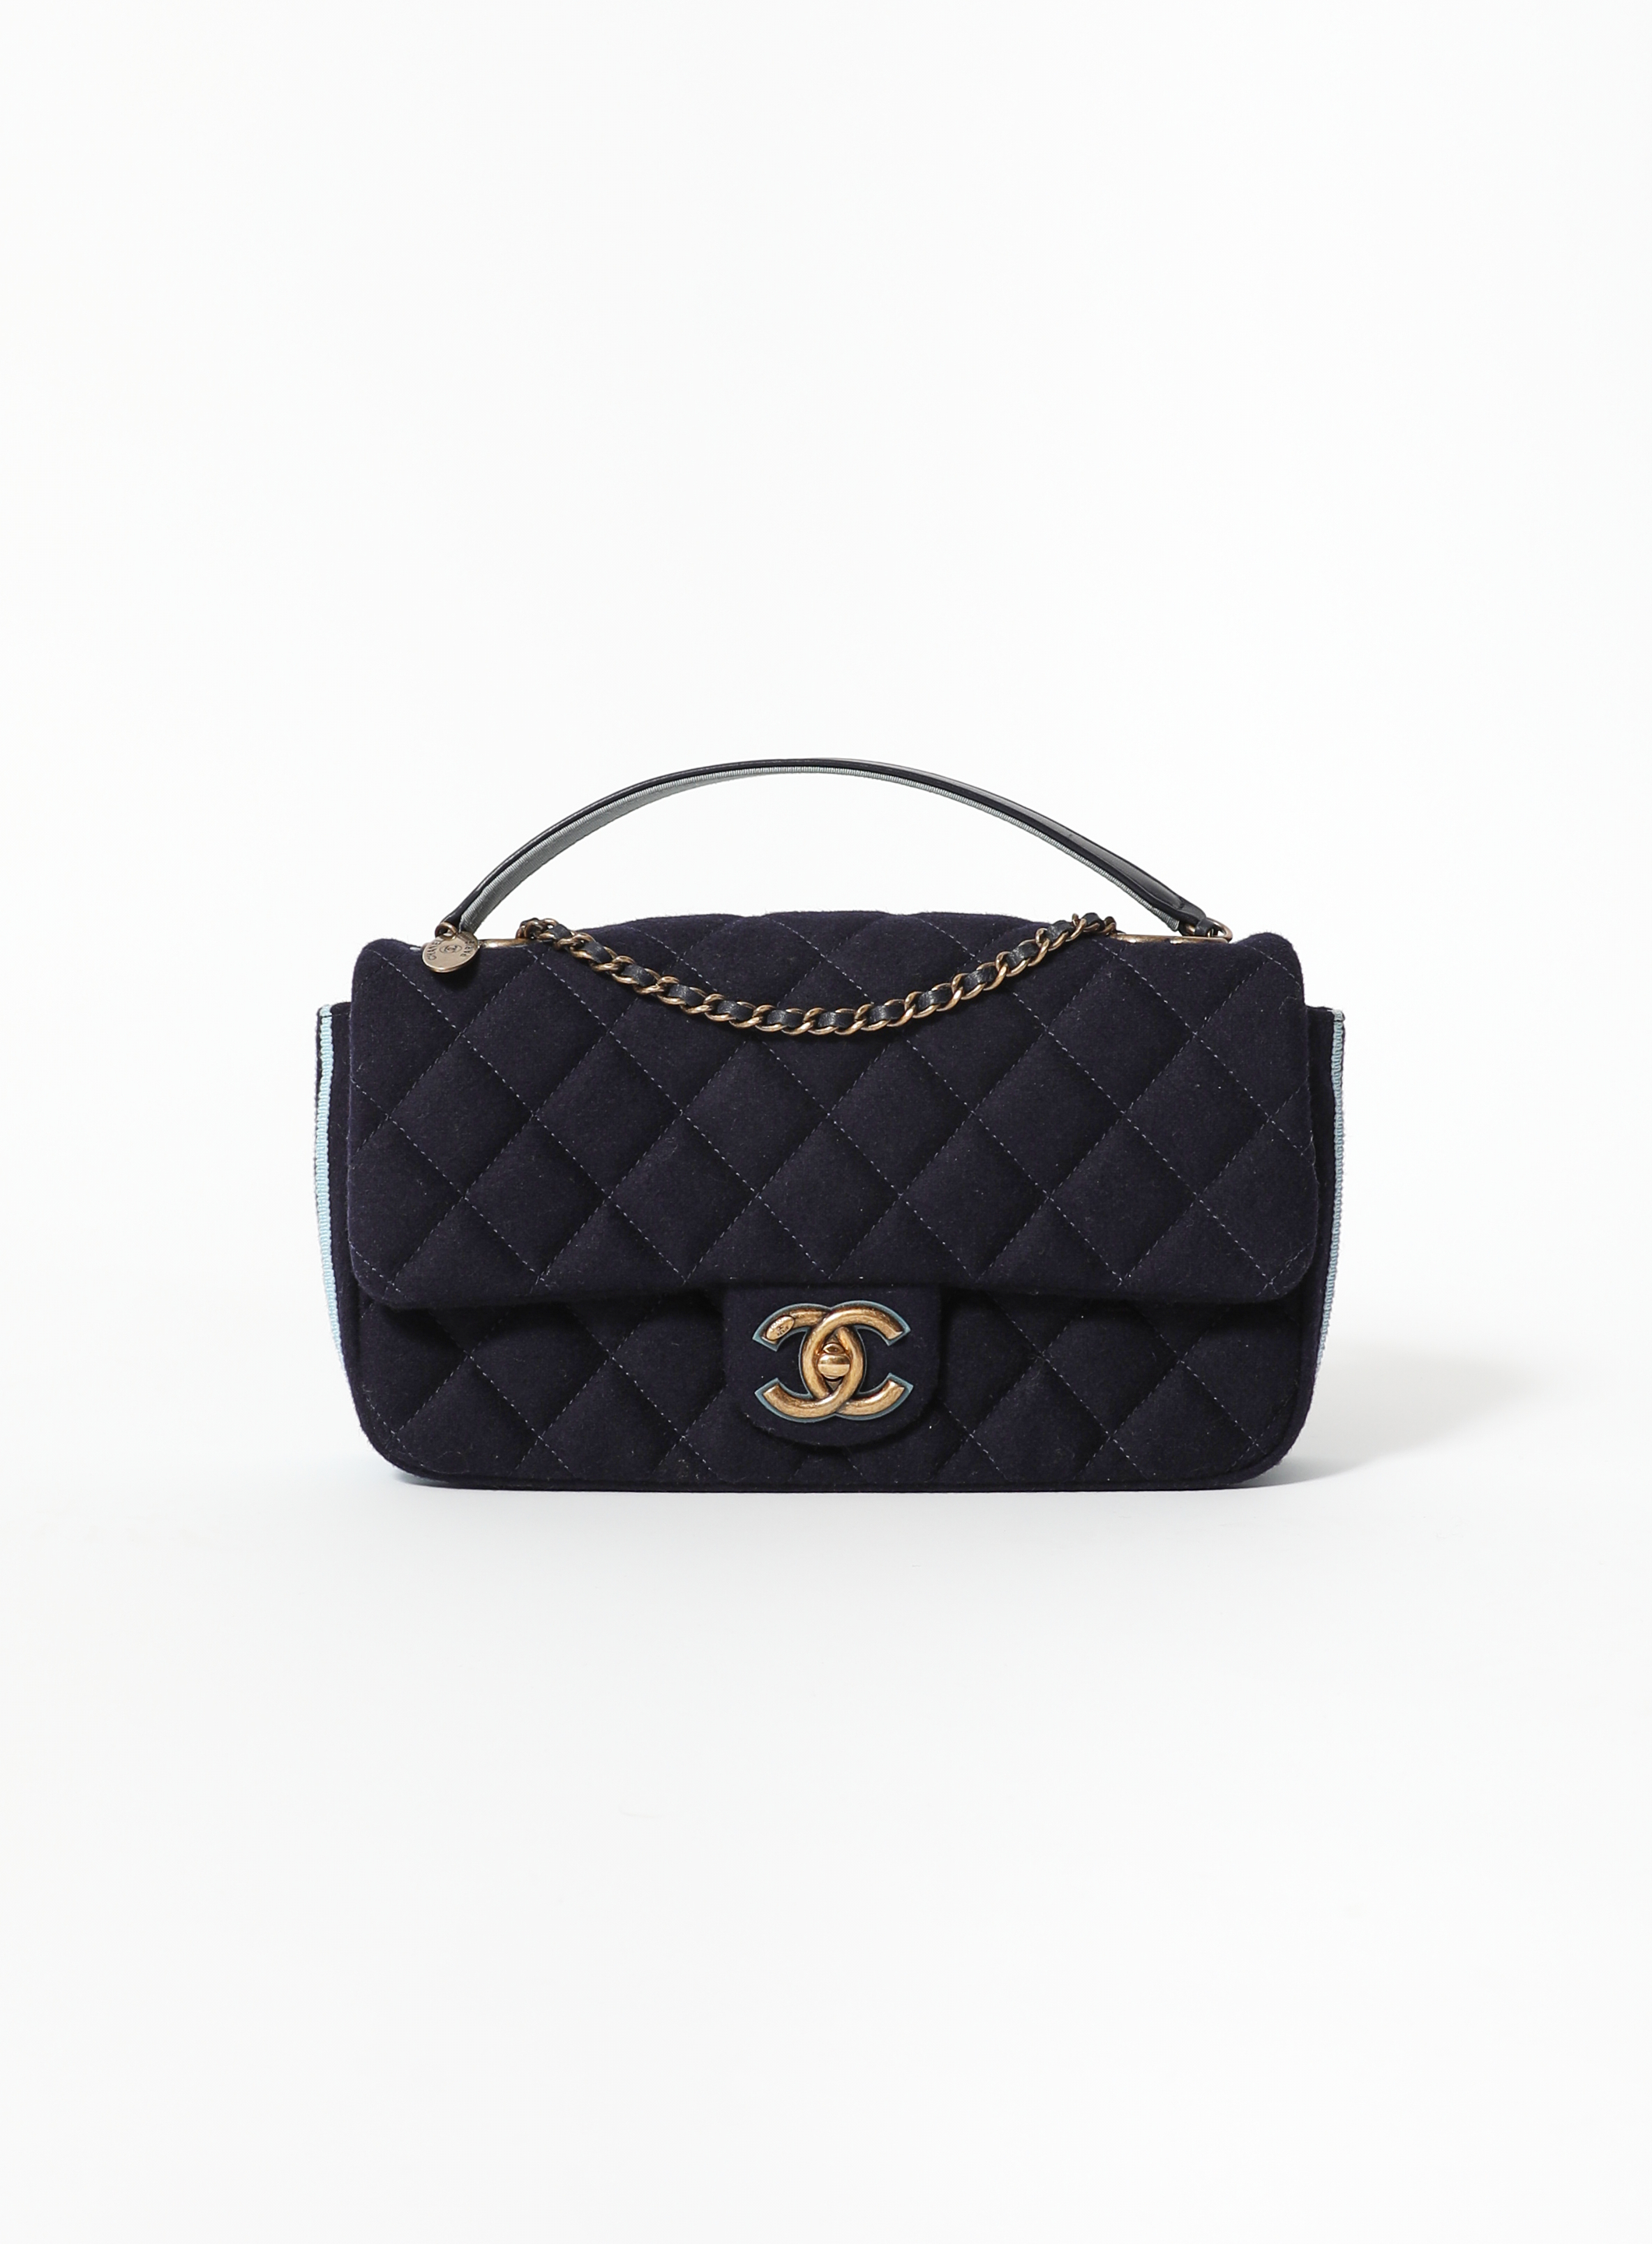 Affordable chanel tweed bag For Sale, Luxury